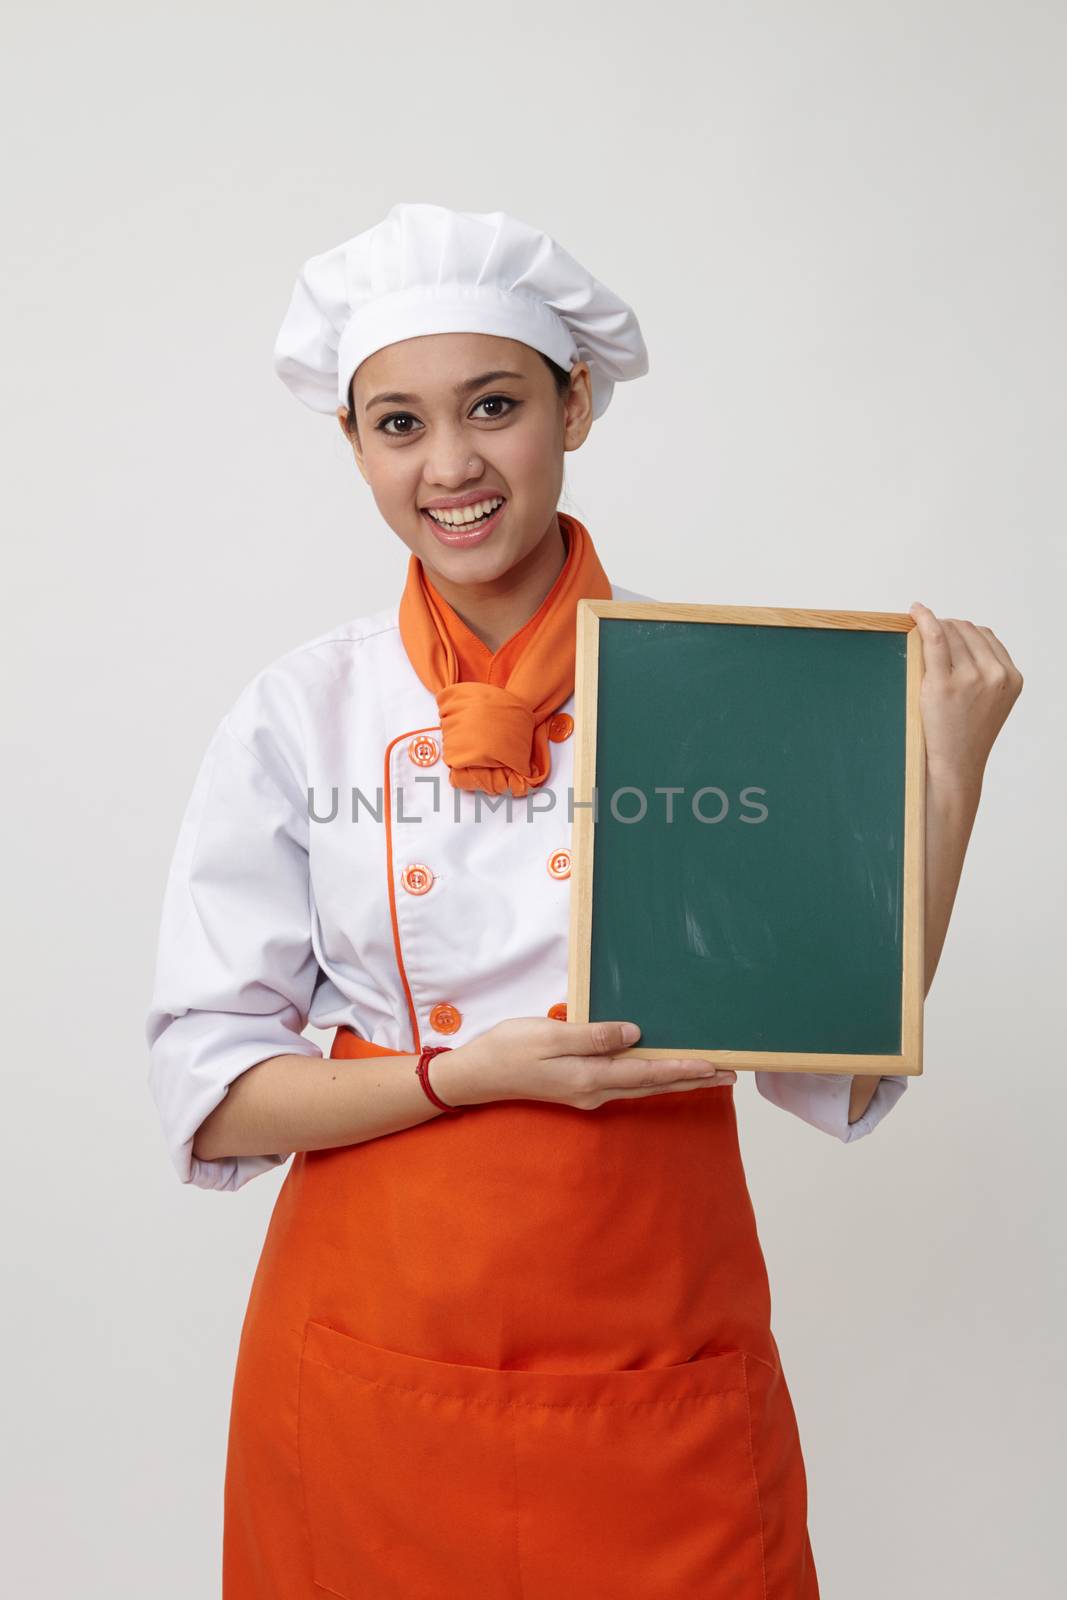 Portrait of a Indian woman with chef uniform holding chalk board